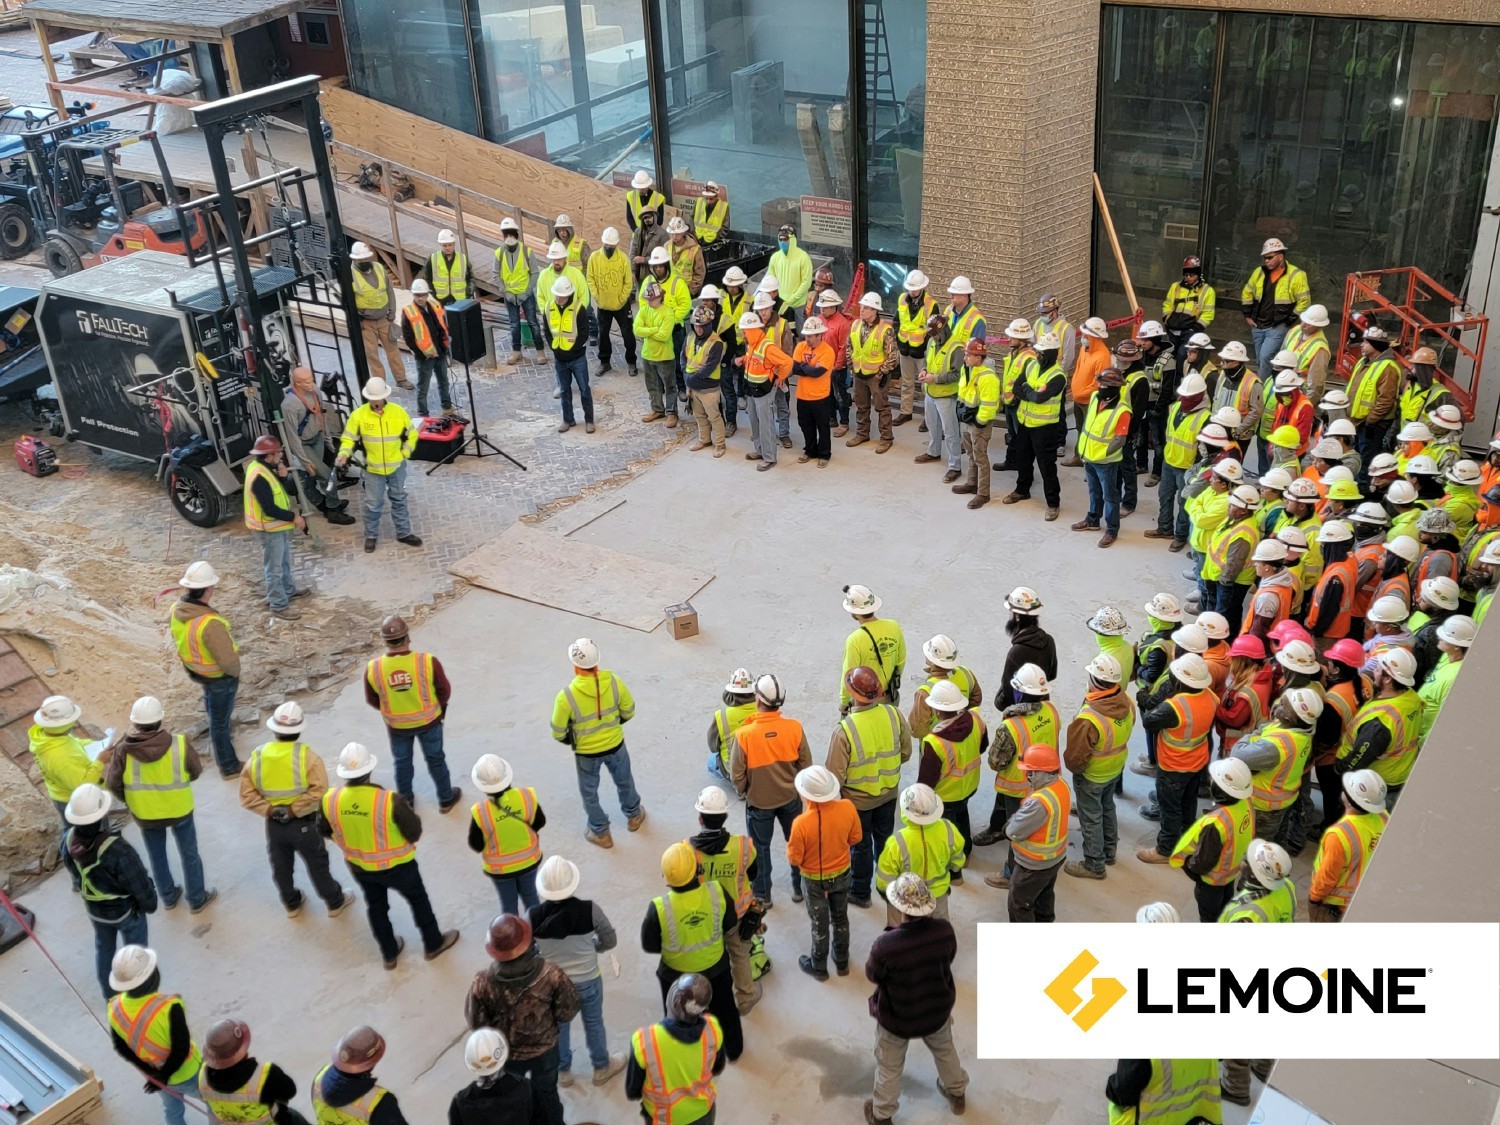 Ensuring safety first: The LEMOINE site project team upholding our core values.